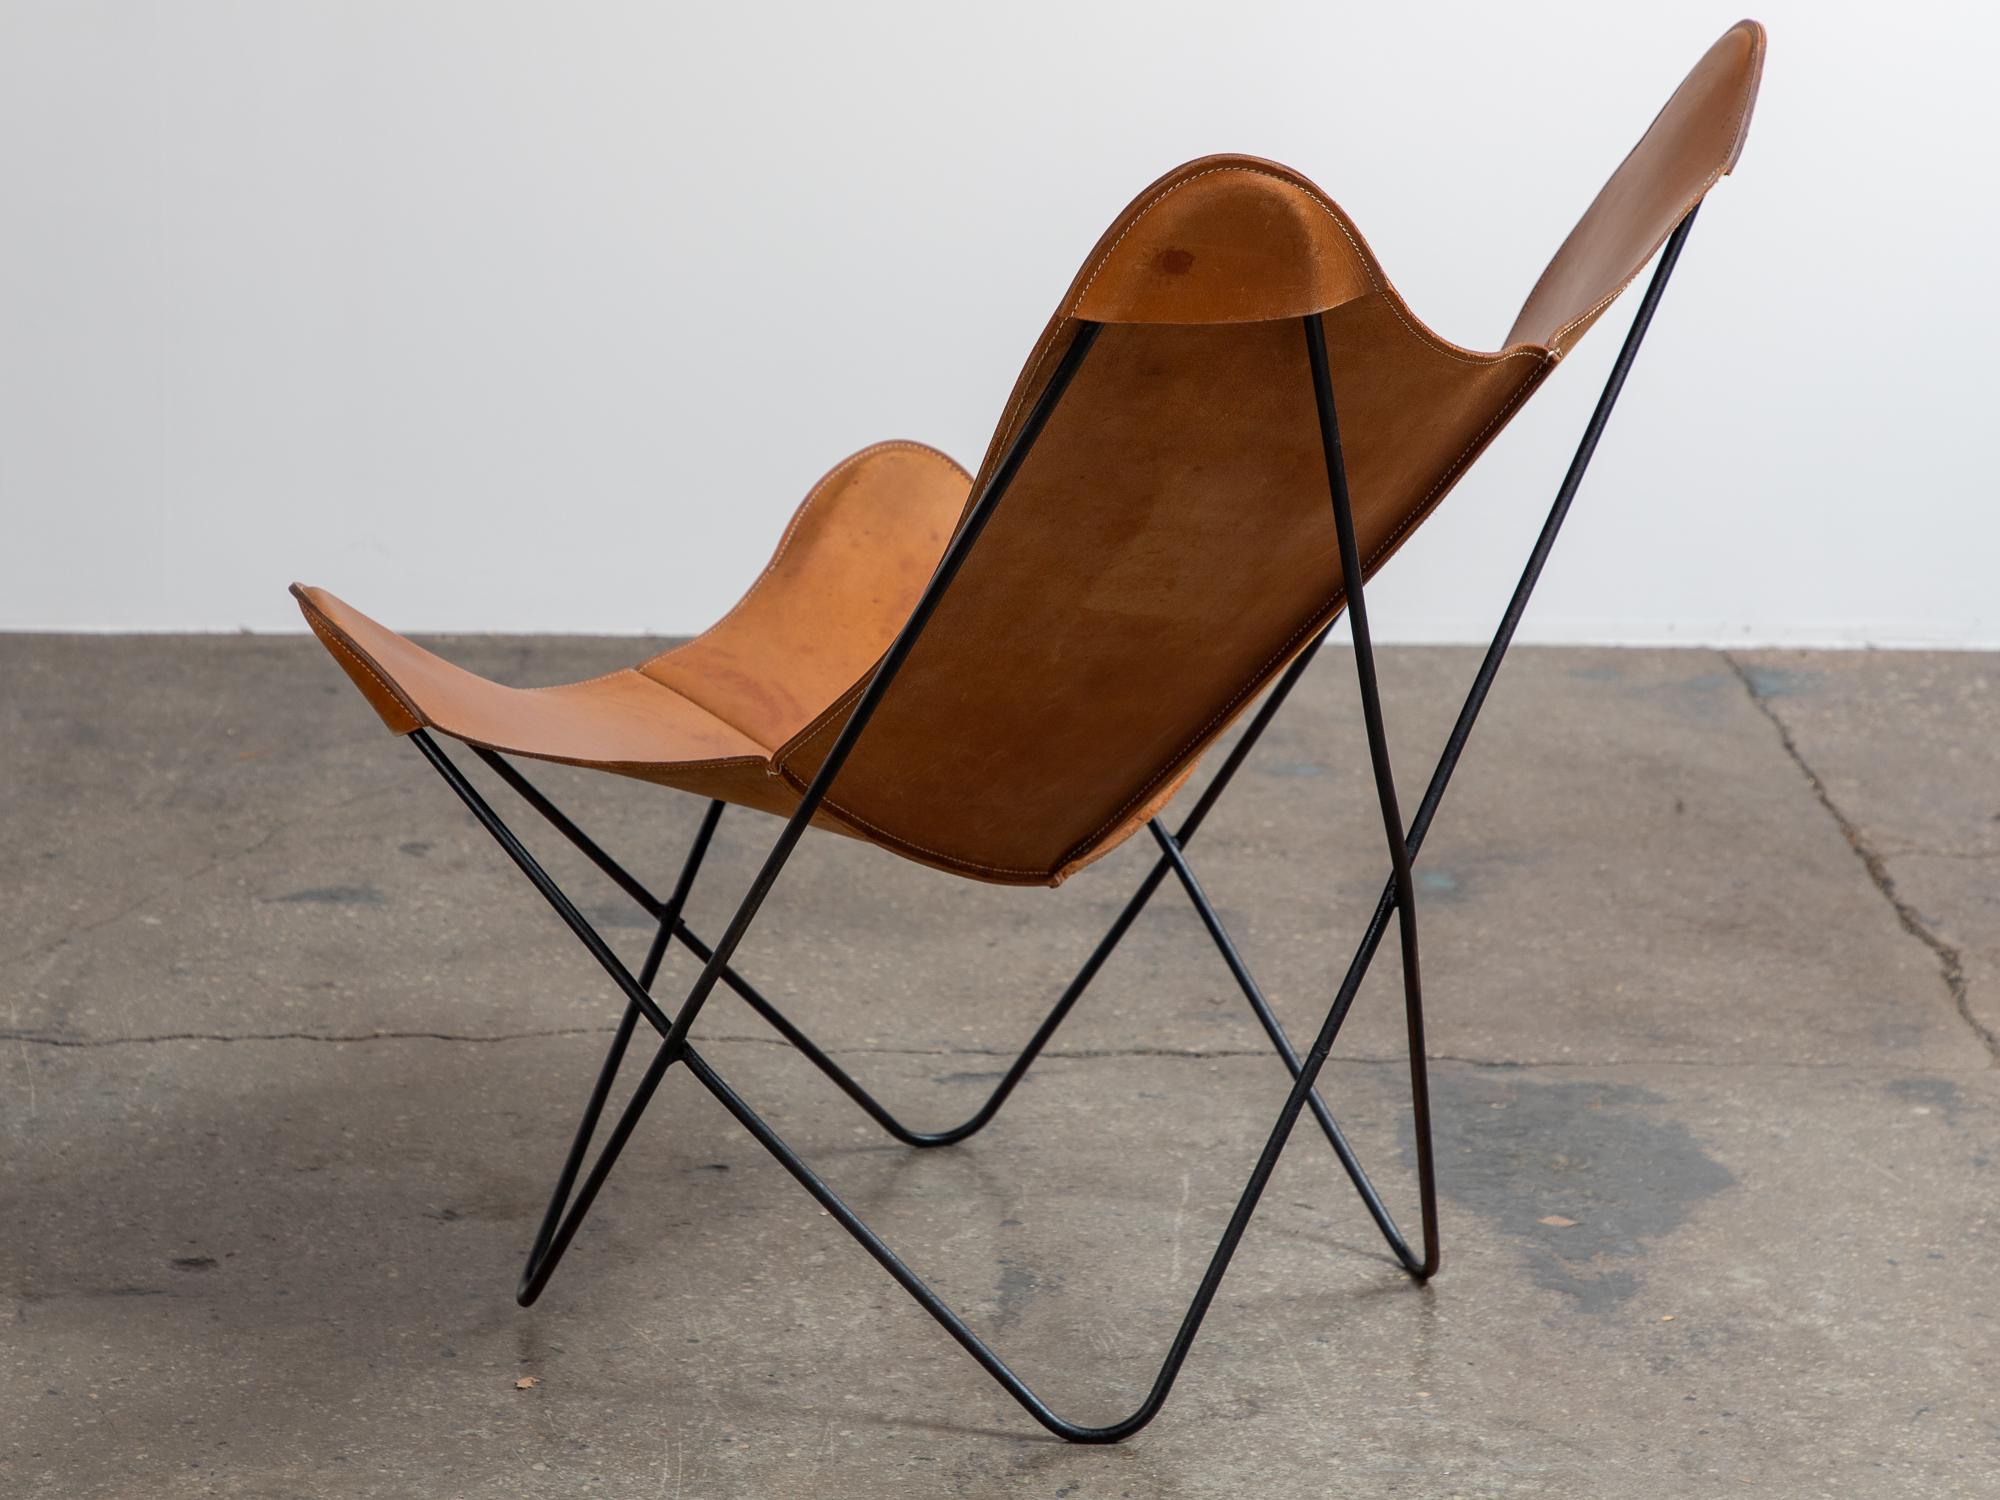 Original Cognac Leather Hardoy Butterfly Chair, Issued by Knoll, 1950s In Good Condition For Sale In Brooklyn, NY